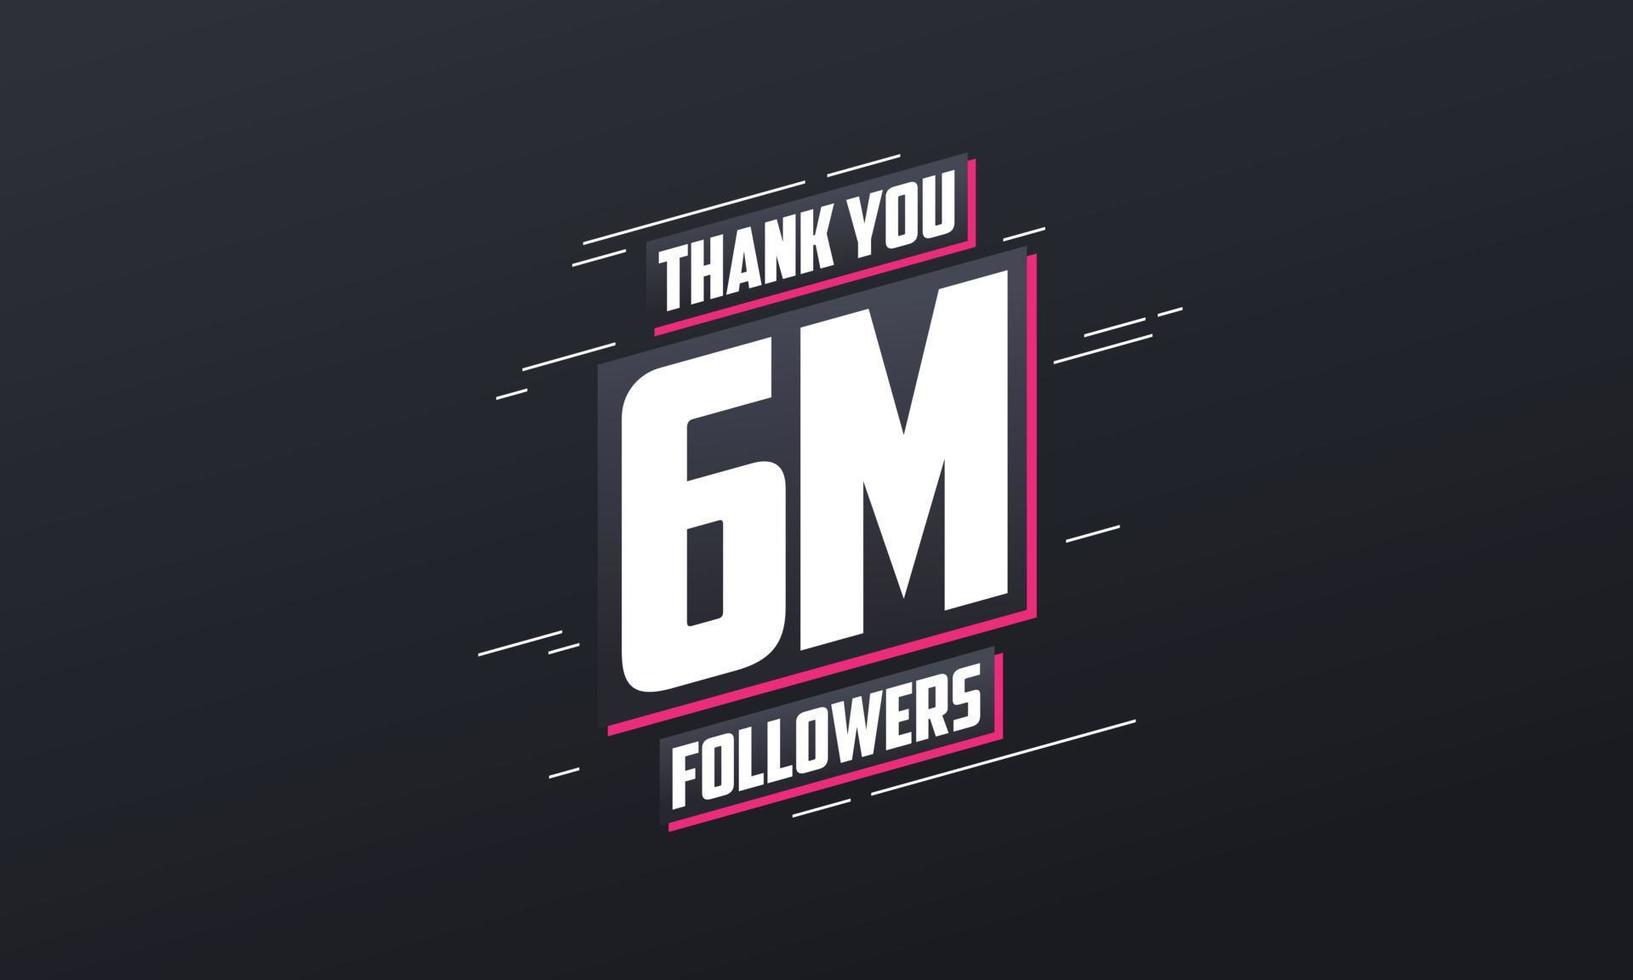 Thank you 6M followers, Greeting card template for social networks. vector